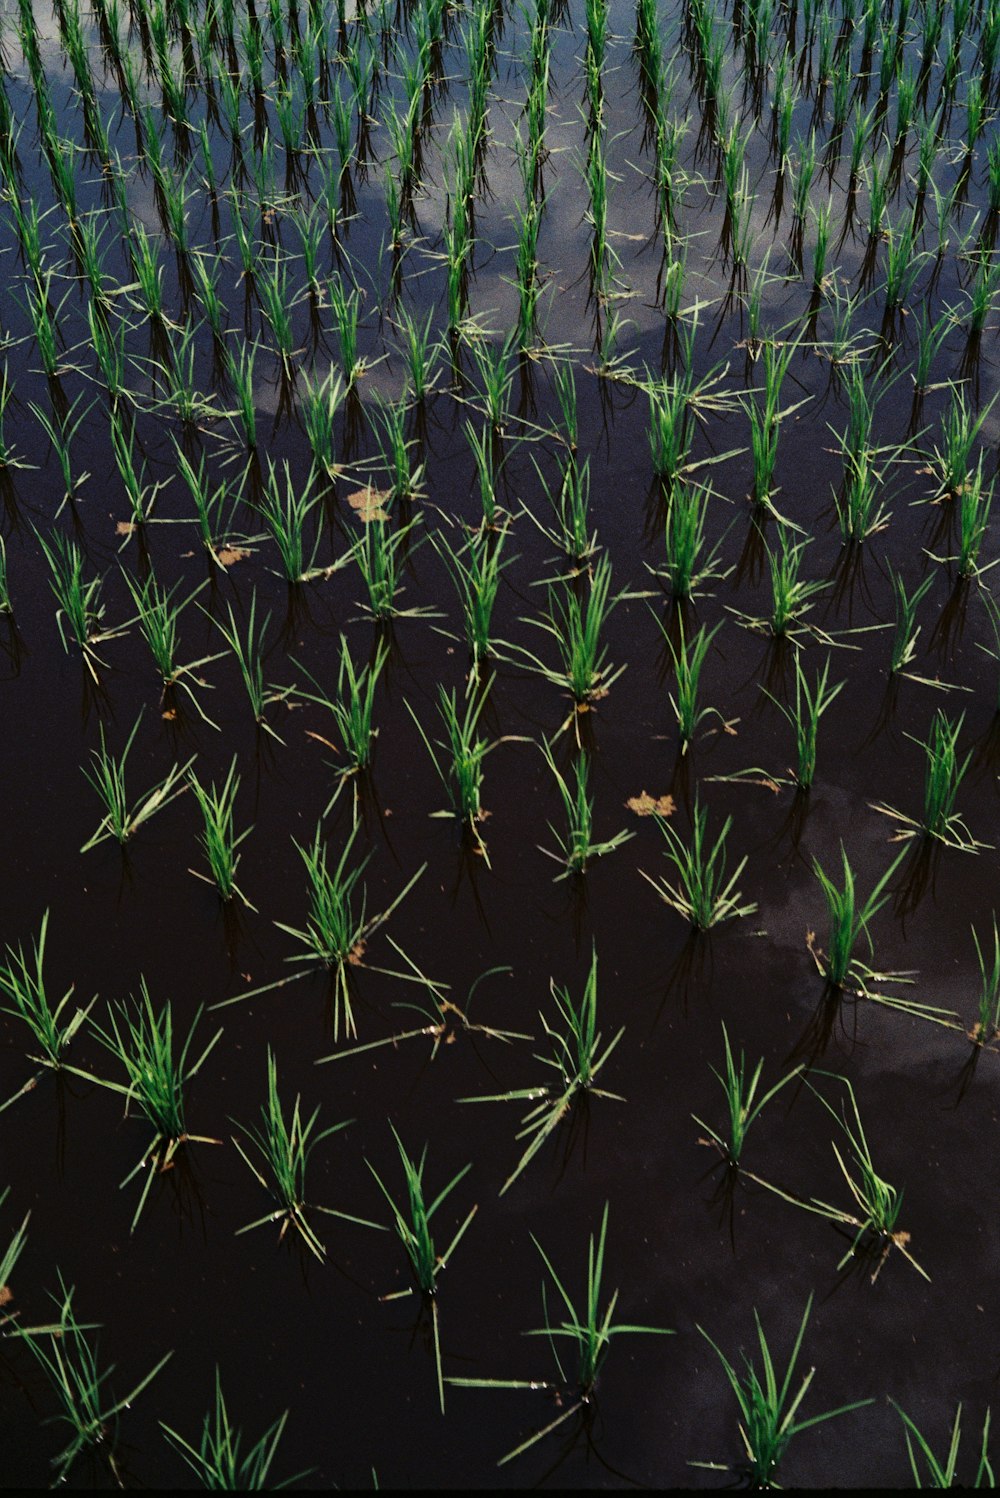 a large field of green plants growing in water